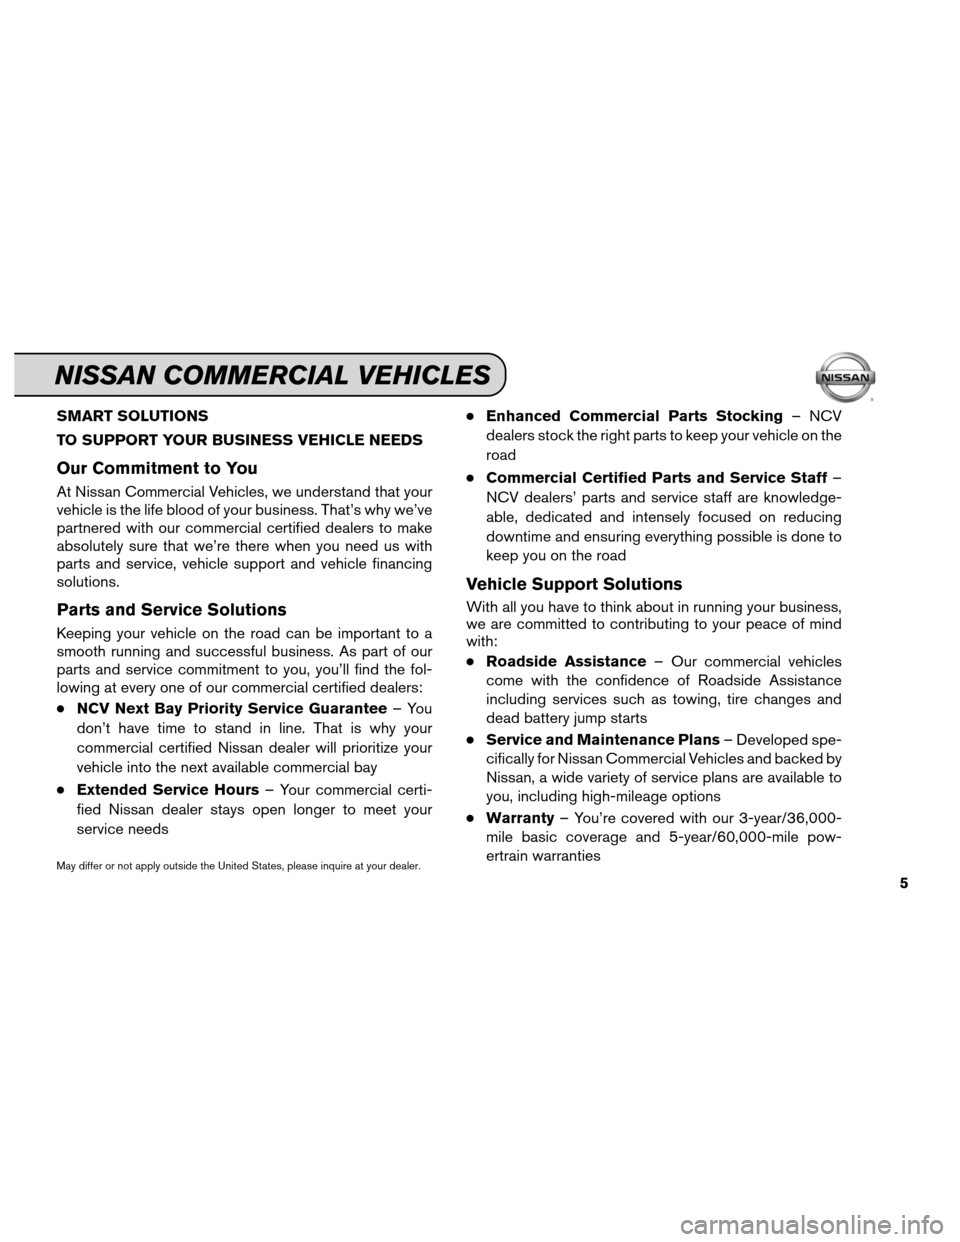 NISSAN XTERRA 2012 N50 / 2.G Service And Maintenance Guide SMART SOLUTIONS
TO SUPPORT YOUR BUSINESS VEHICLE NEEDS
Our Commitment to You
At Nissan Commercial Vehicles, we understand that your
vehicle is the life blood of your business. That’s why we’ve
par